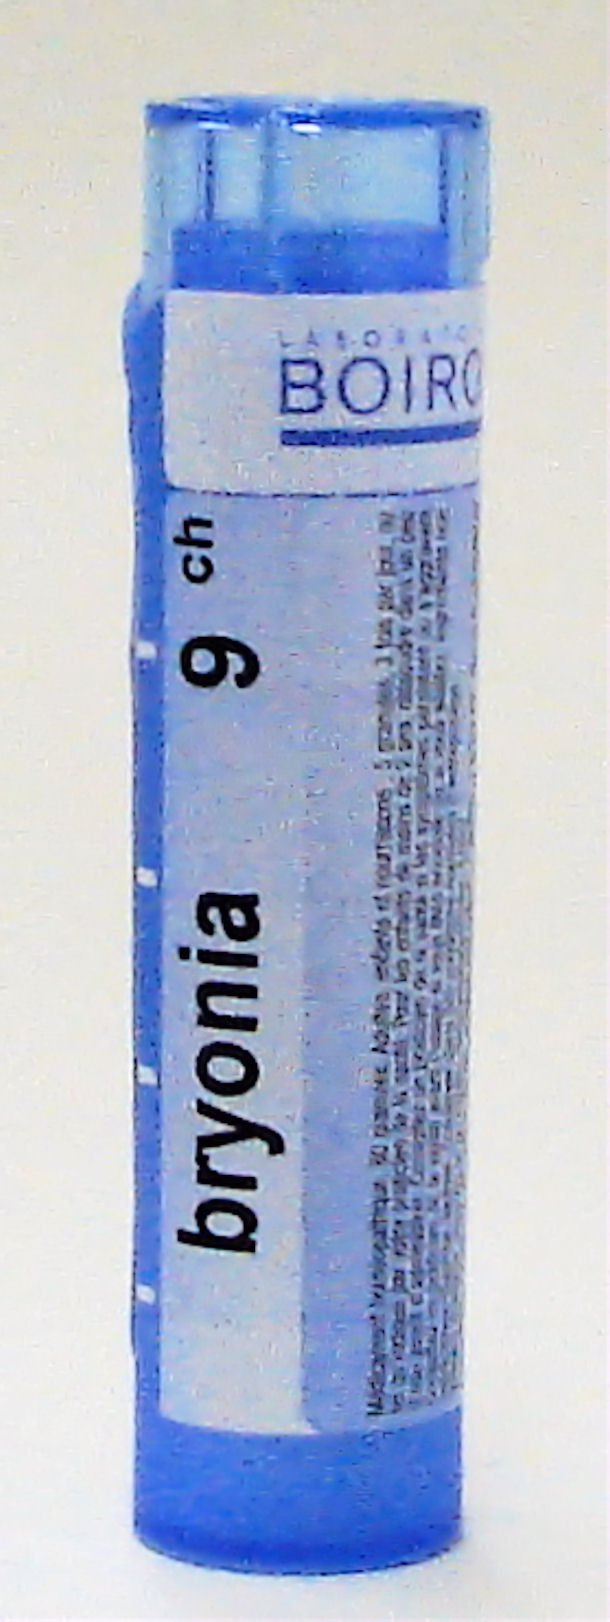 Bryonia 9 ch sublingual pellets (Boiron)